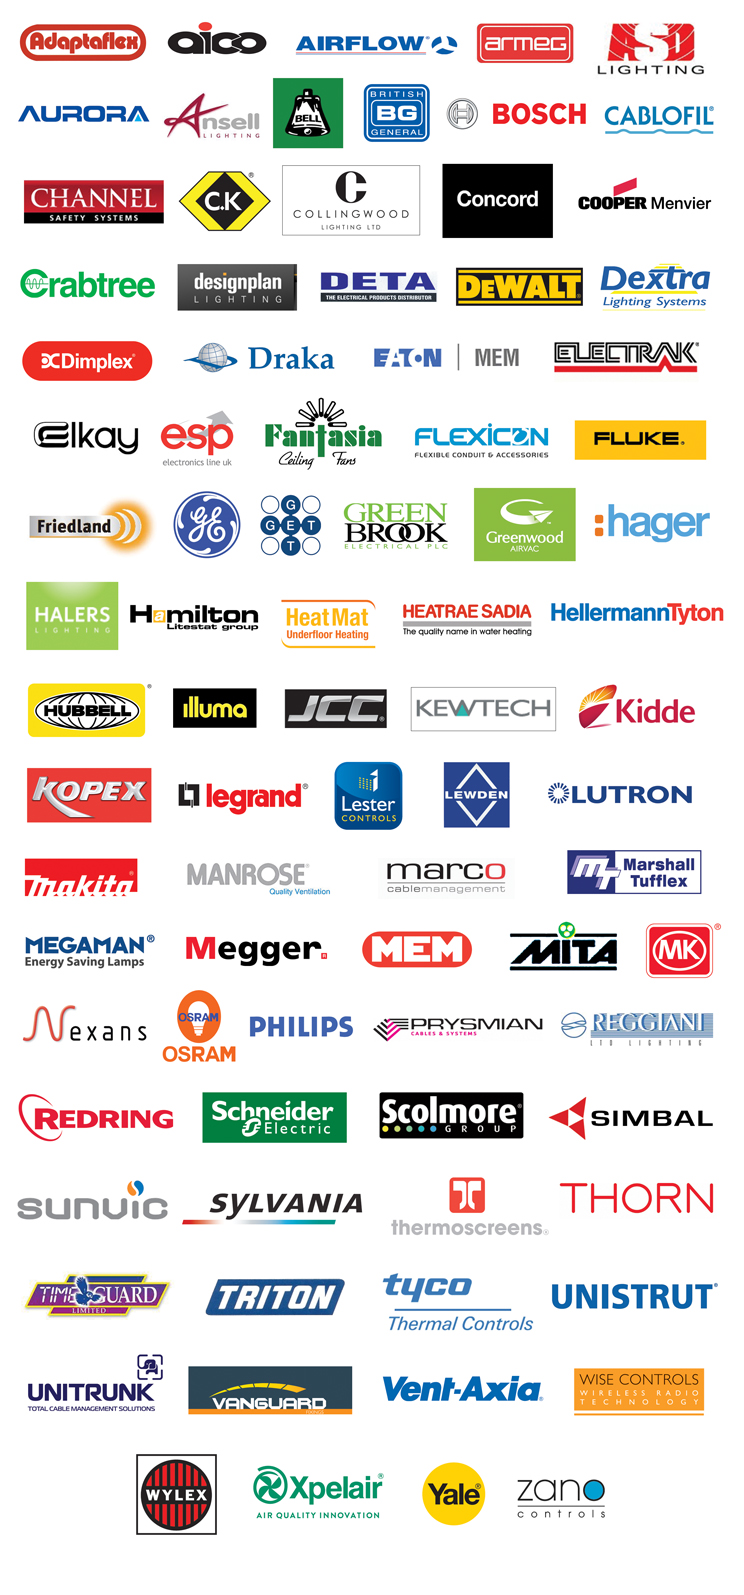 These are the manufacturers we supply